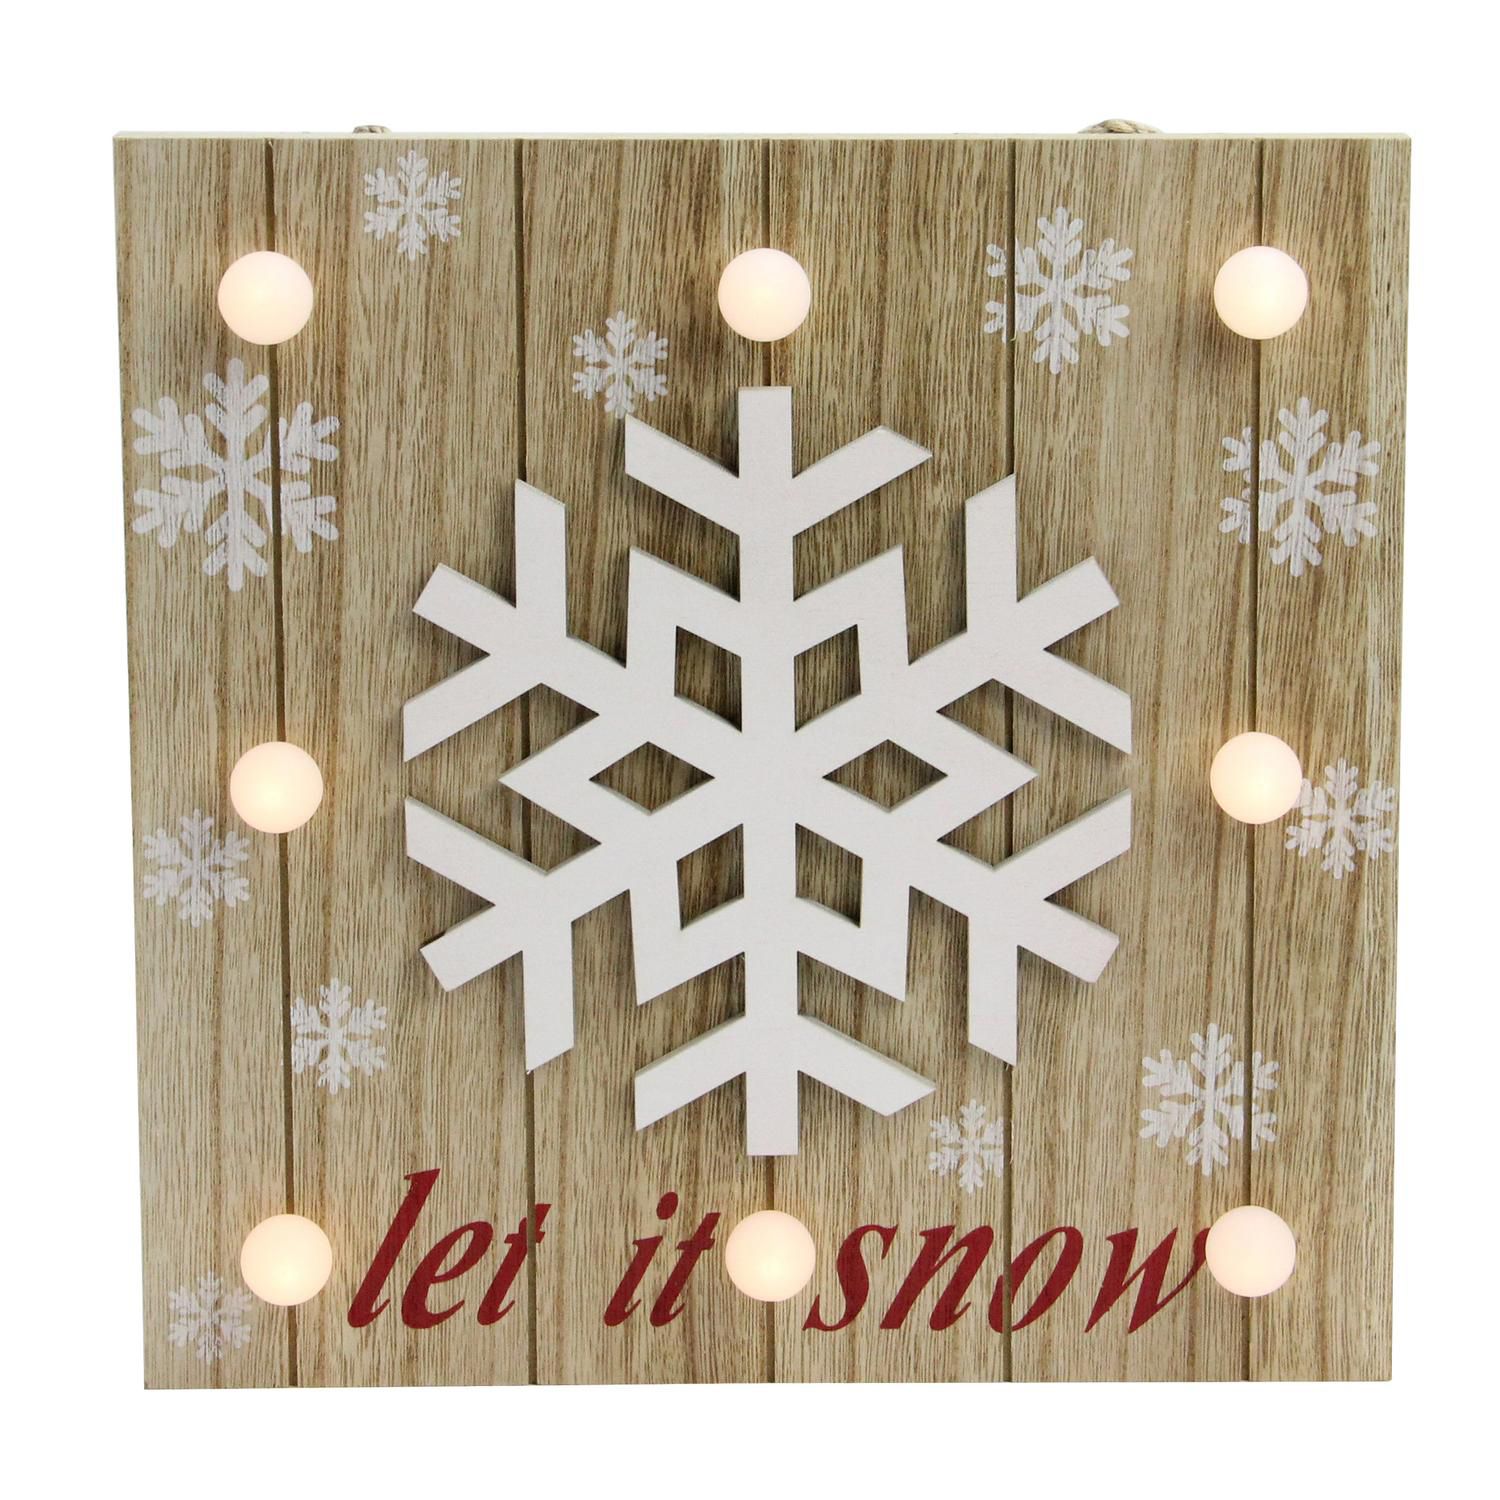 Let It Snow Natural Wood & Snowflake Wall Decor – Pier1 Throughout Most Recently Released Snow Wall Art (View 13 of 20)